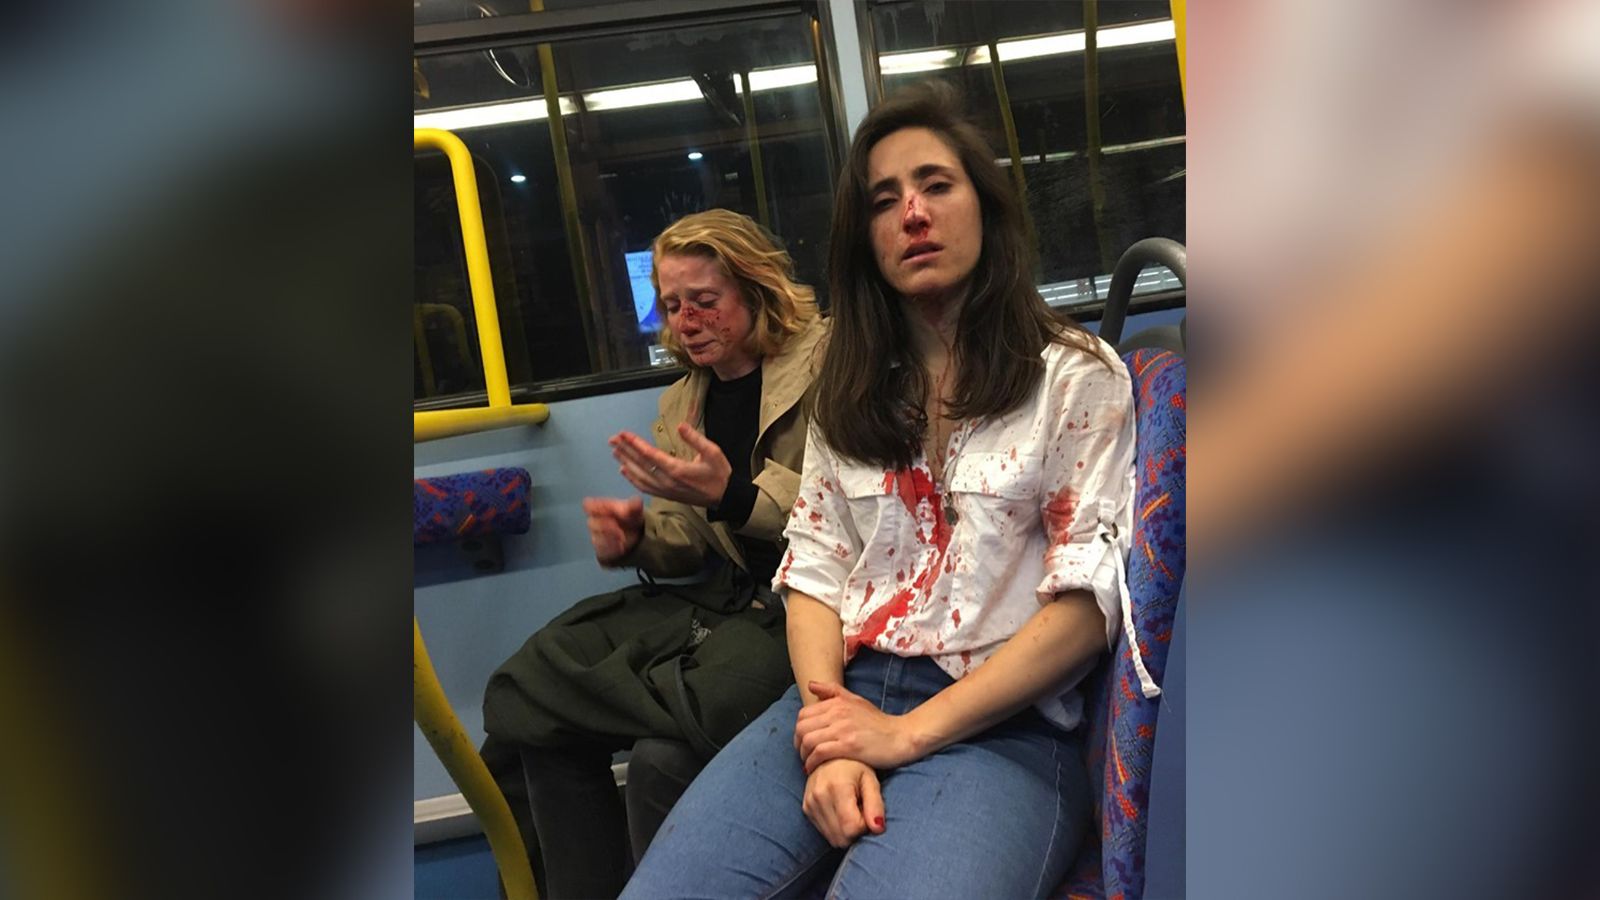 Drunk Forced Lesbian Porn - London bus attack: Lesbian couple viciously beaten in homophobic incident |  CNN